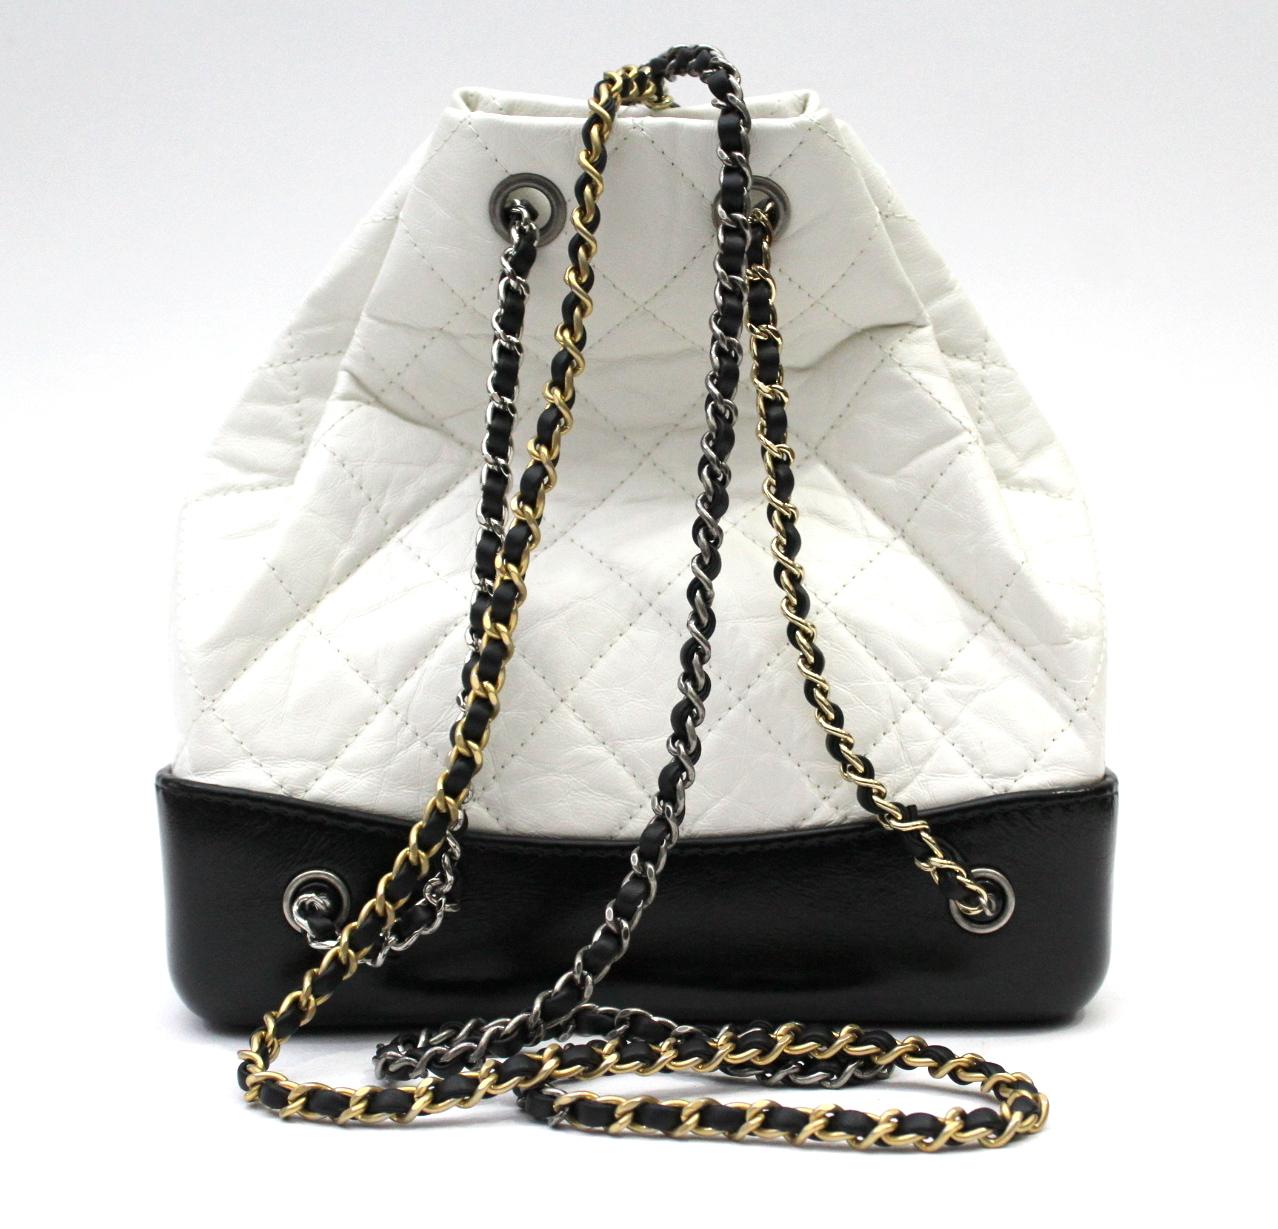 Chanel Gabrielle backpack in white aged calfskin and smooth leather rigid bottom. Chains are gold, silver and ruthenium. Hologram intact and matching authenticity card. Measurements: H 22cm W 22cm D 10 cm (on the rigid part) 